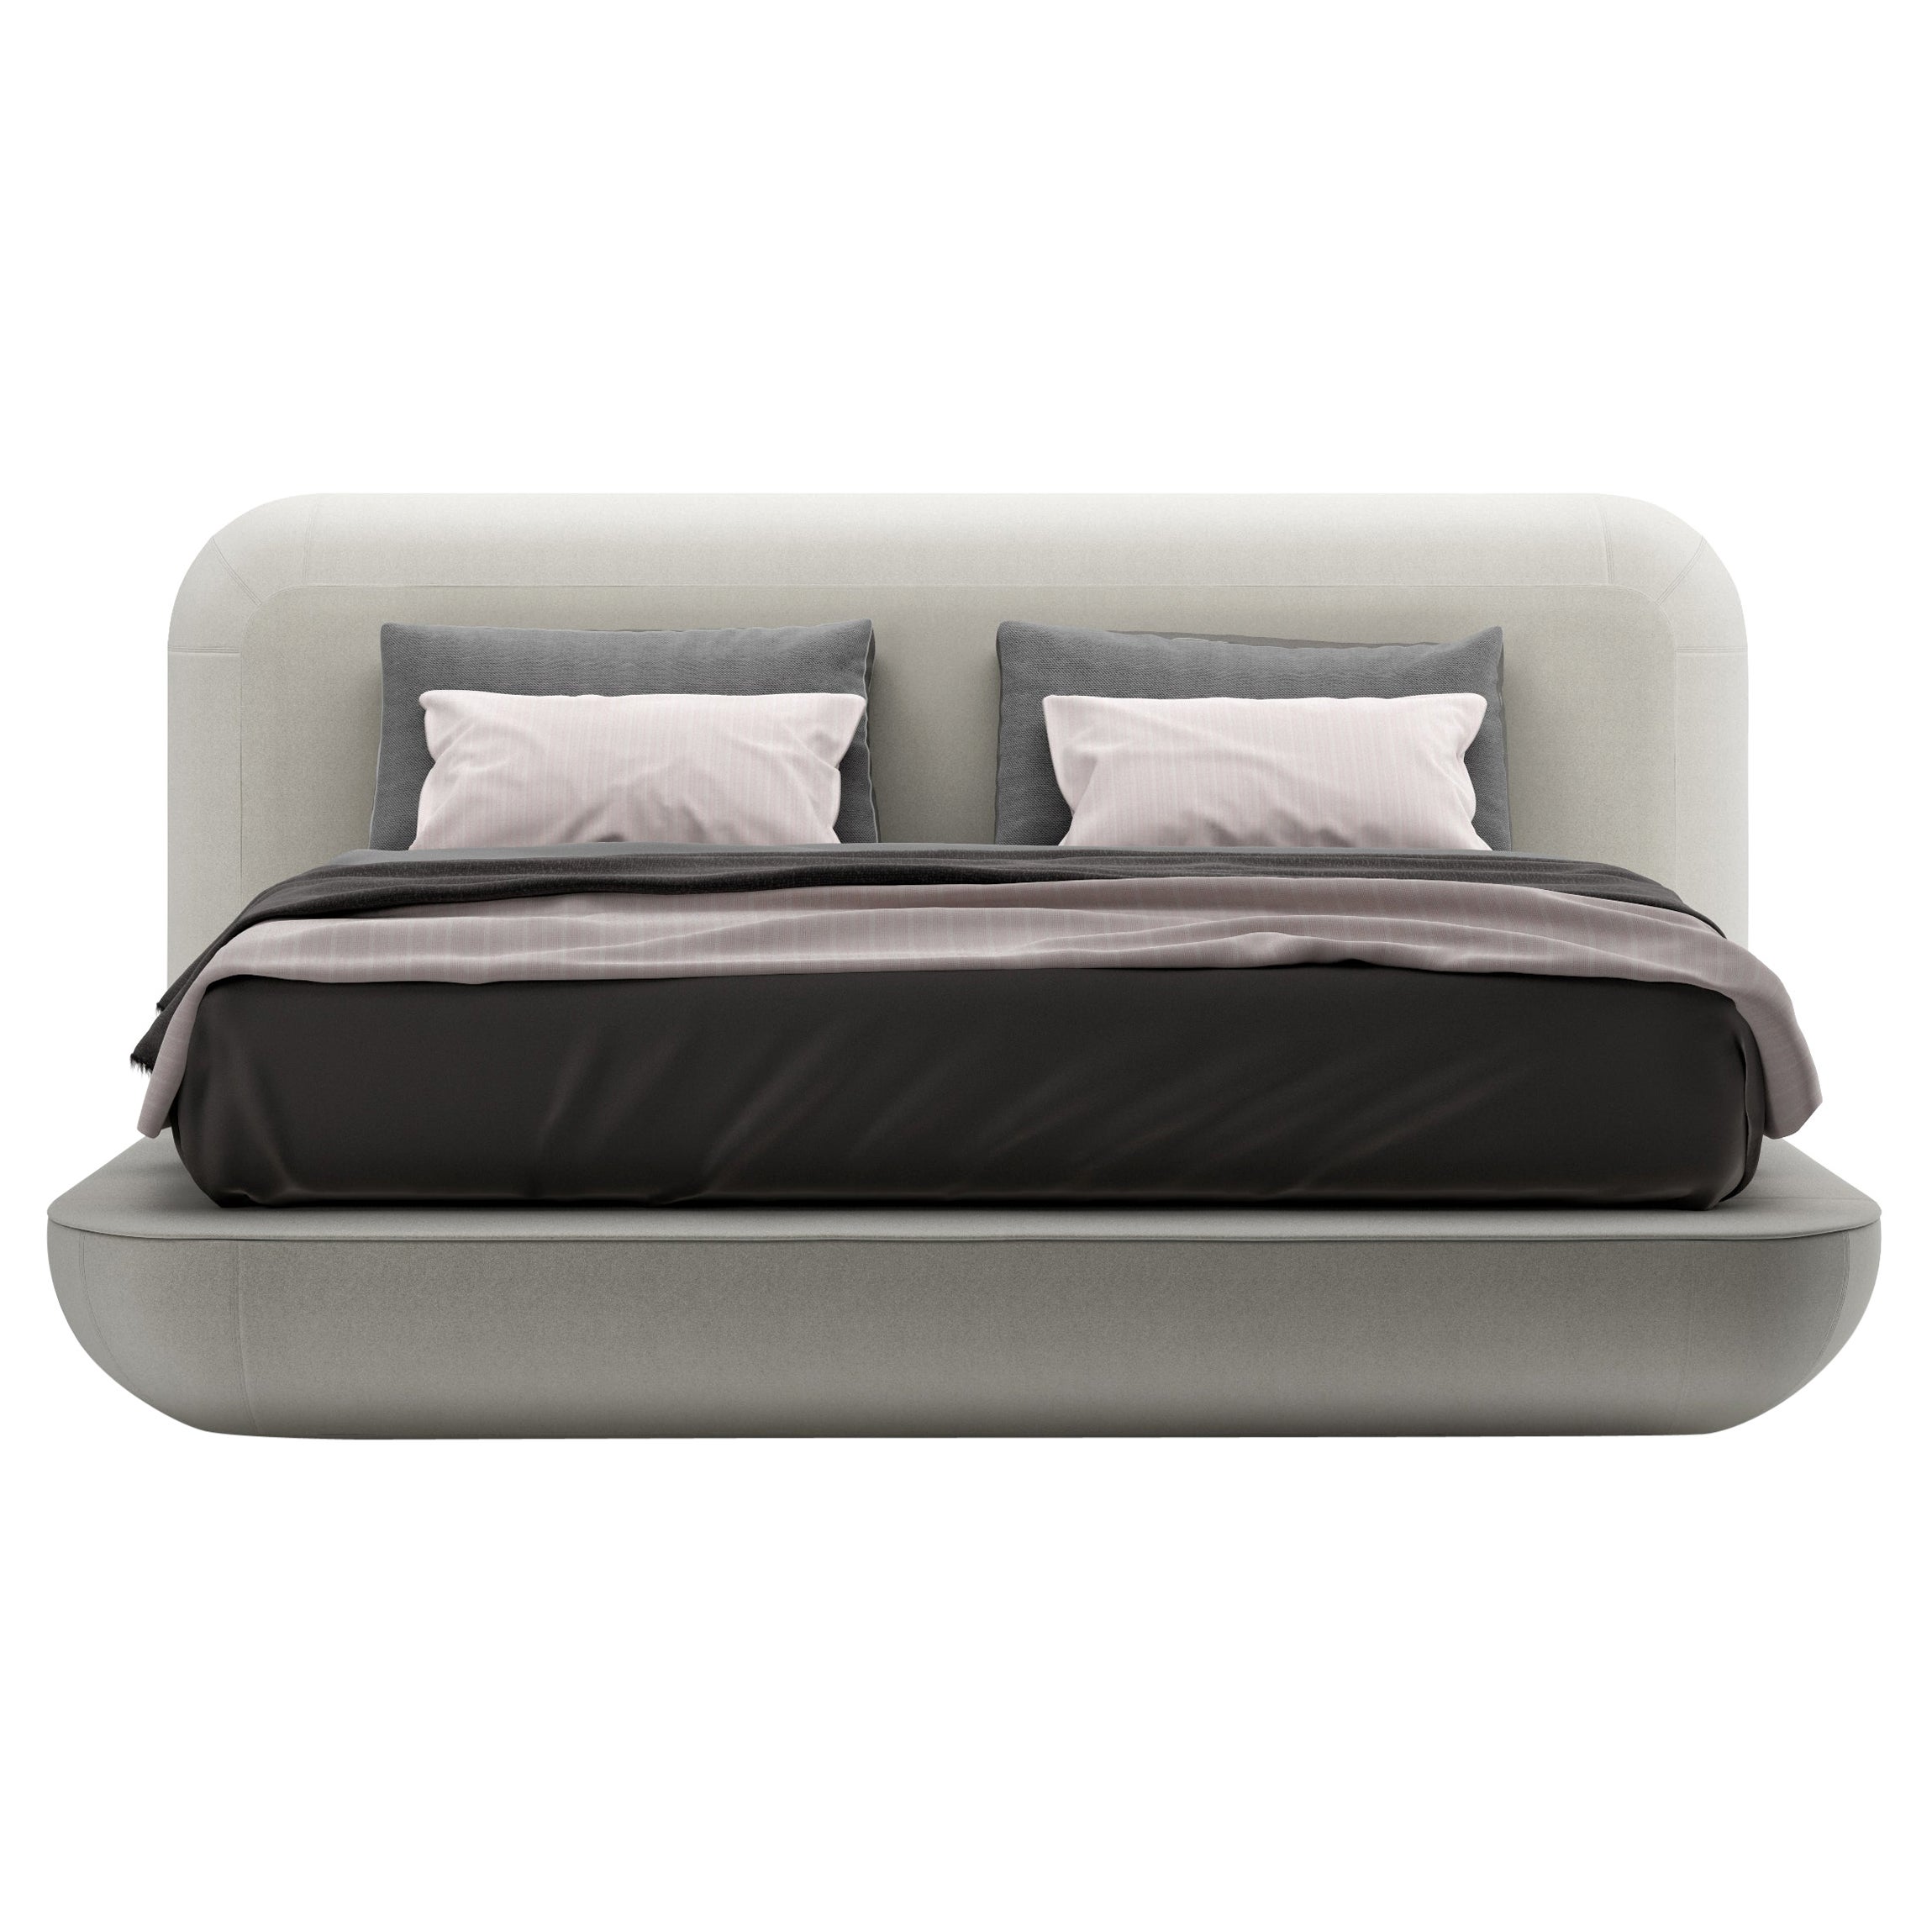 Alias 28A Small Okome Bed with Headboard Upholstered in White by Nendo